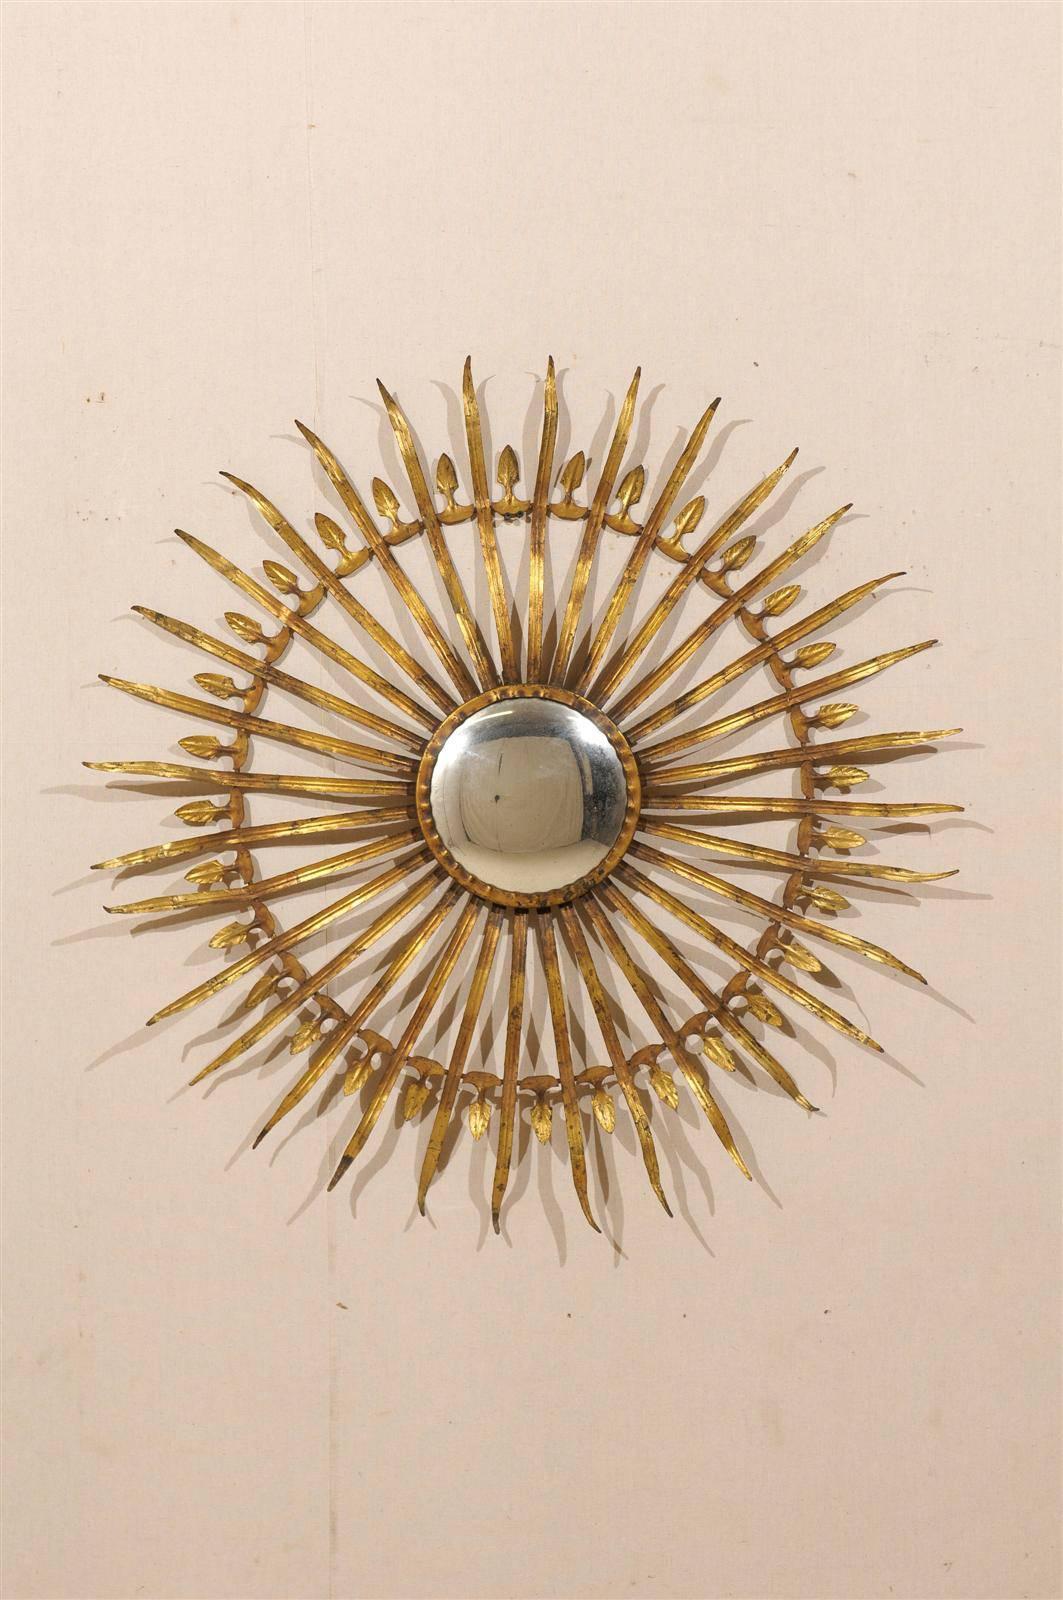 A French sunburst and foliage motif gilded metal wall ornament with round central mirror and nice patina. This French gilt metal mirror features a halo of undulating leaves radiating from the centre. Halfway through the end, a circle of smaller